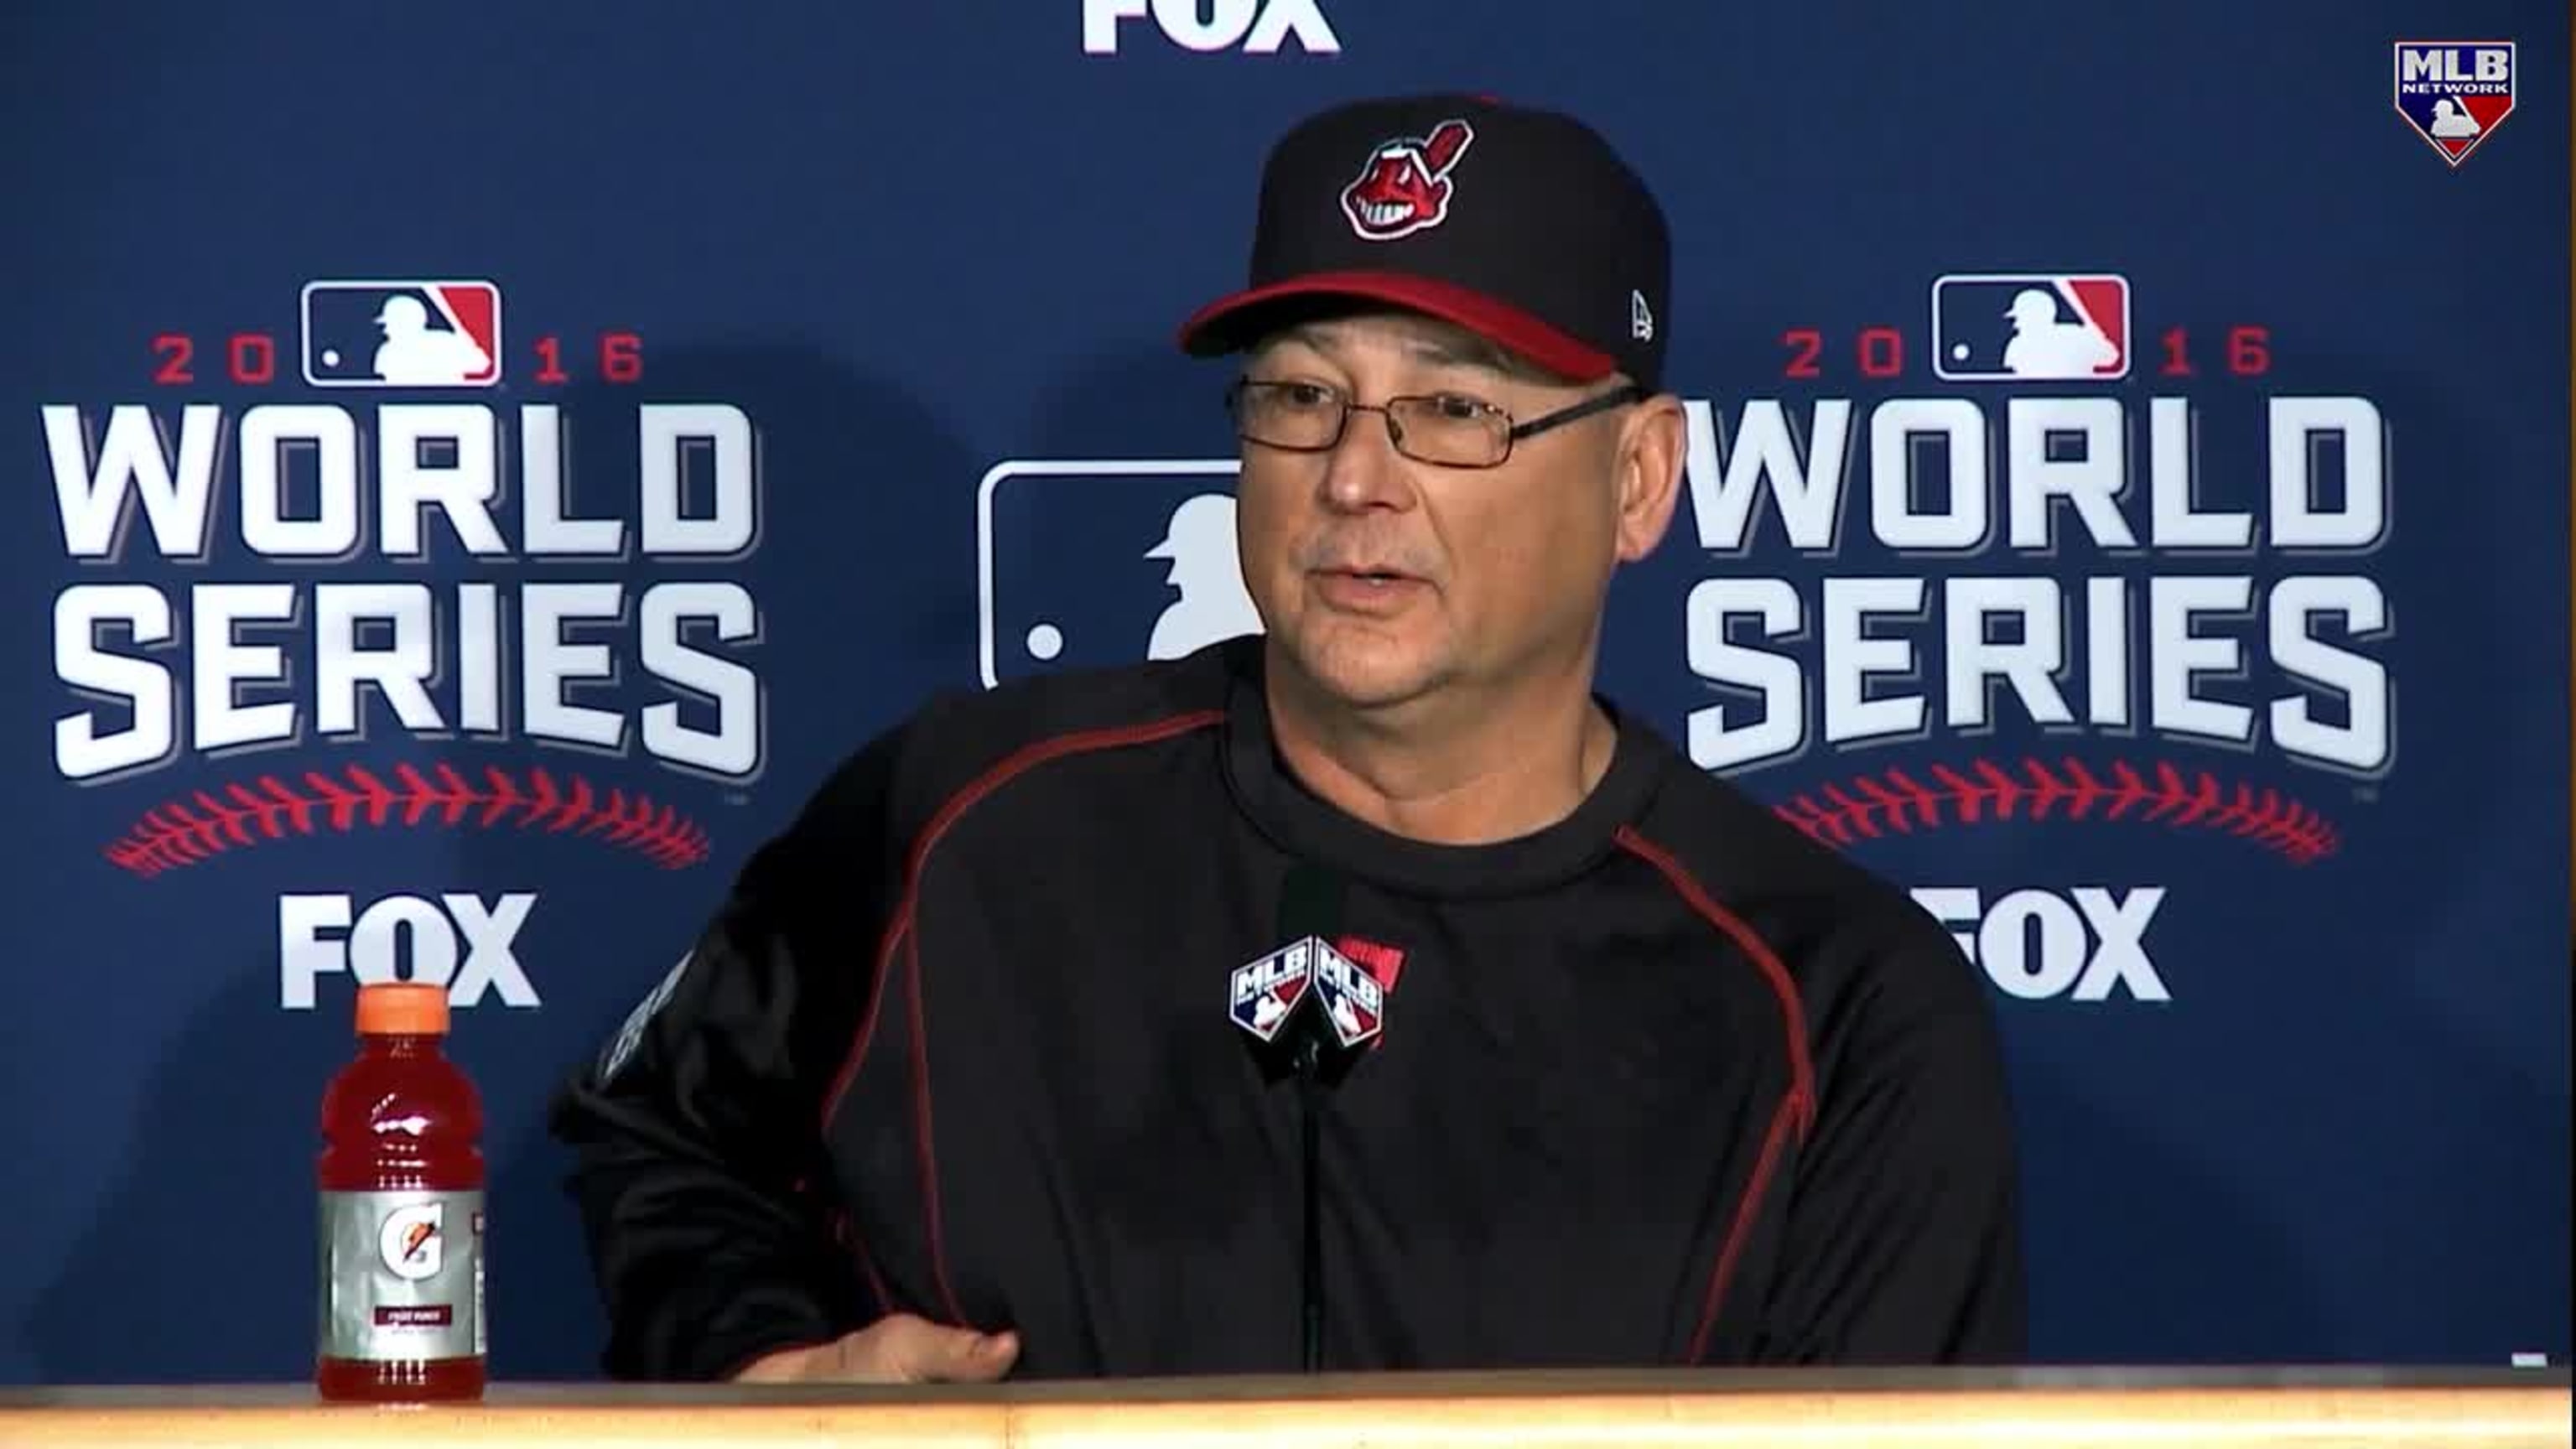 Guardians' Terry Francona thought he was flashed on scooter ride